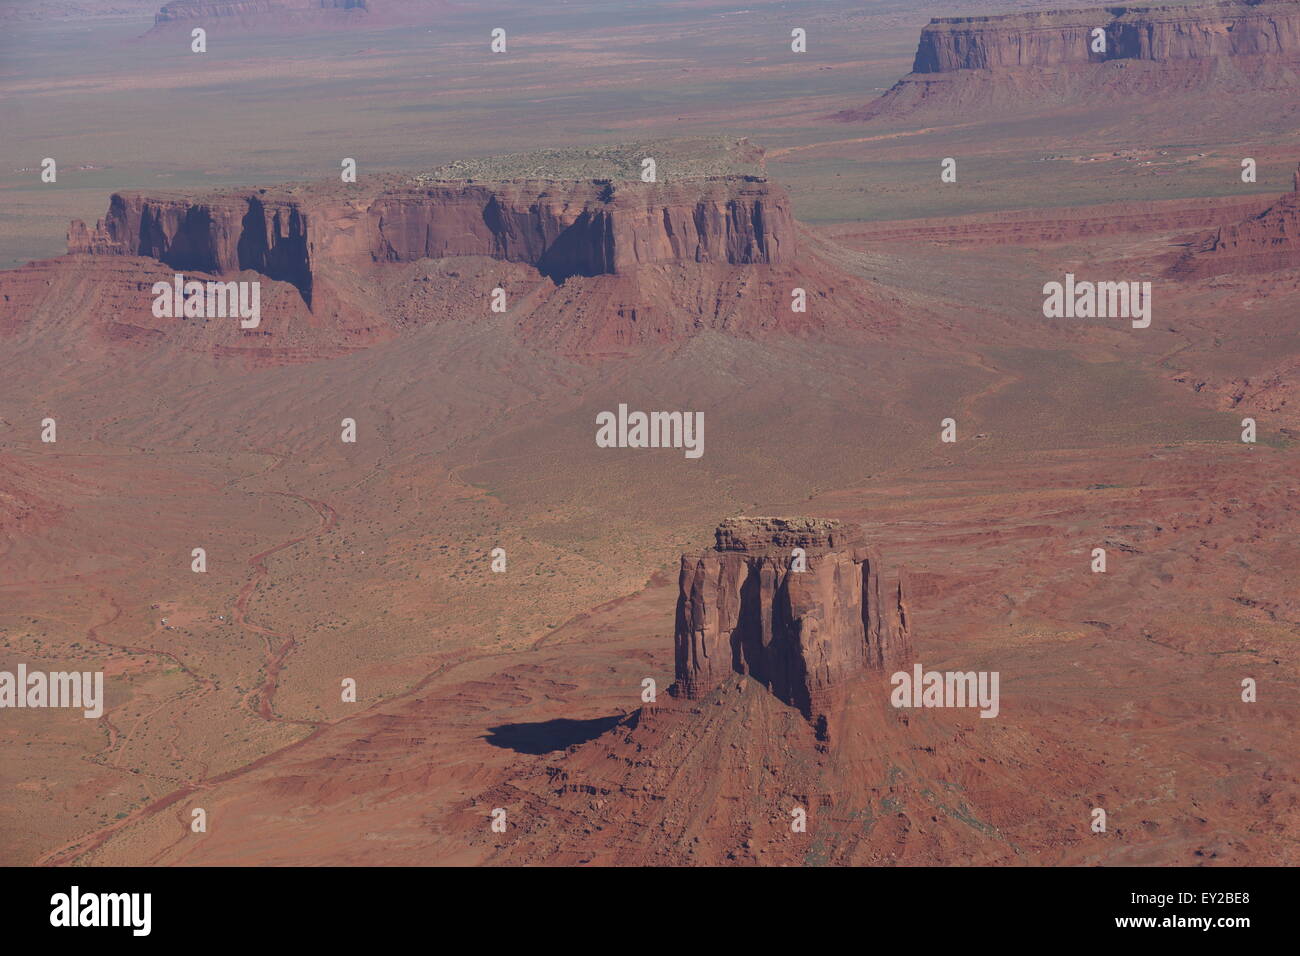 monument valley areal view Stock Photo